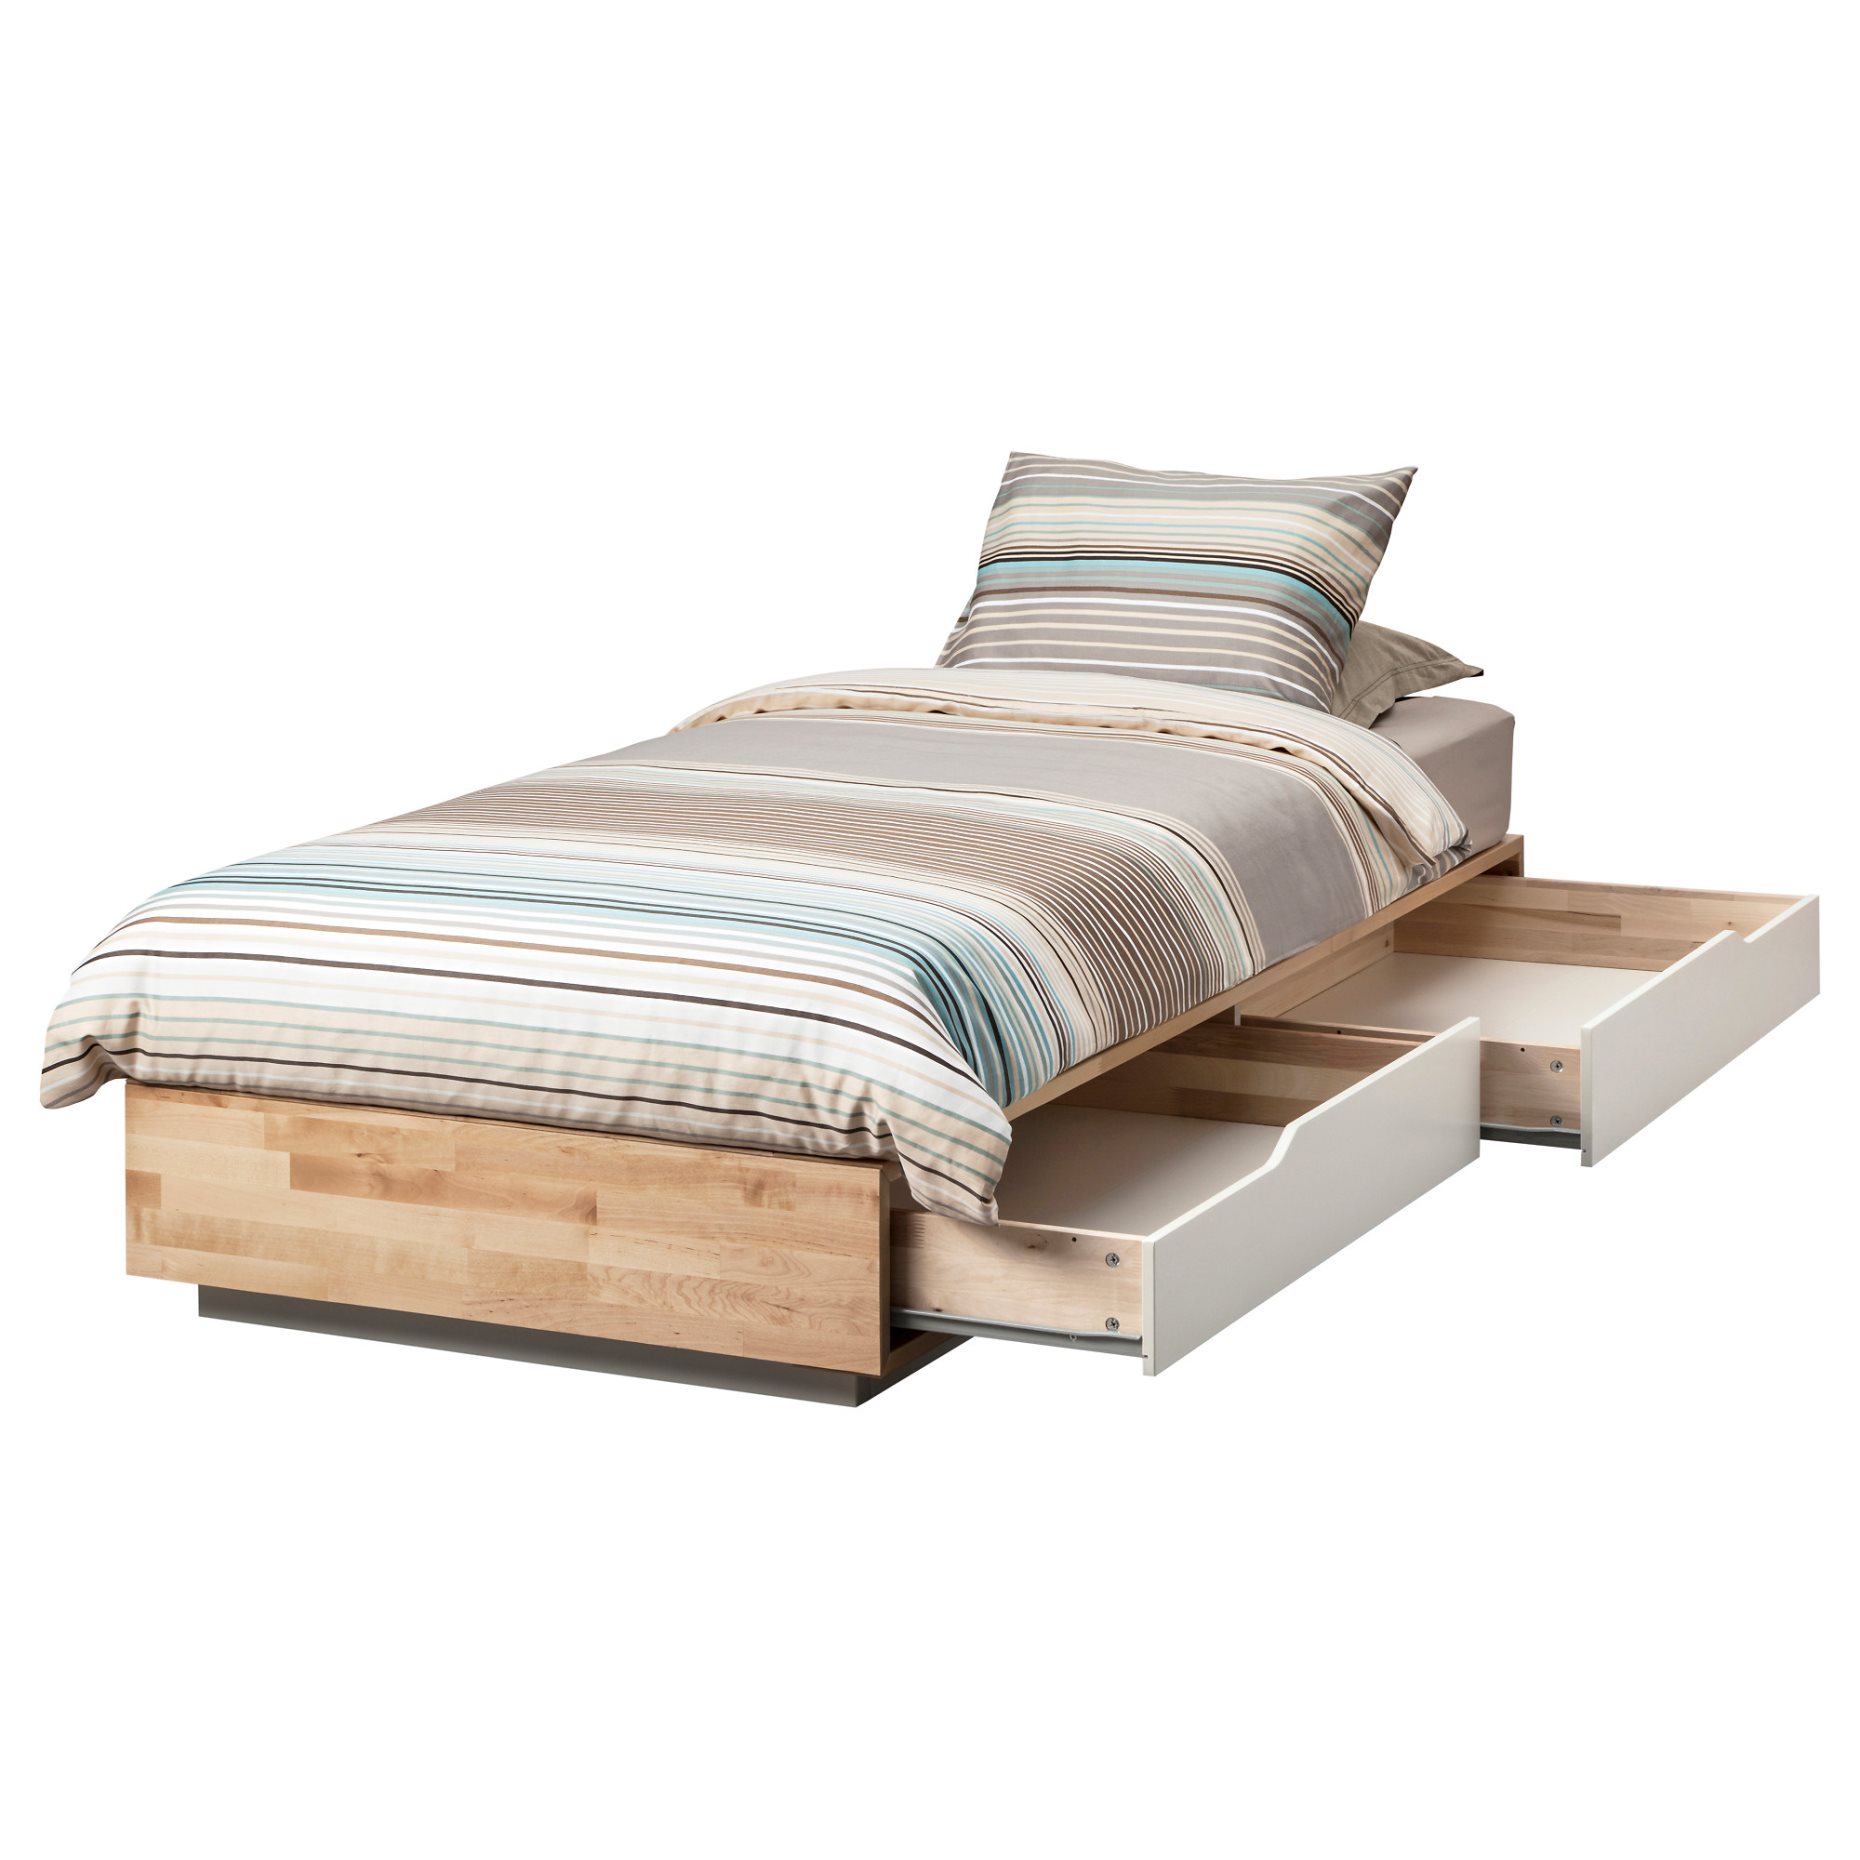 MANDAL, bed with storage, 90x200 cm, 602.446.08